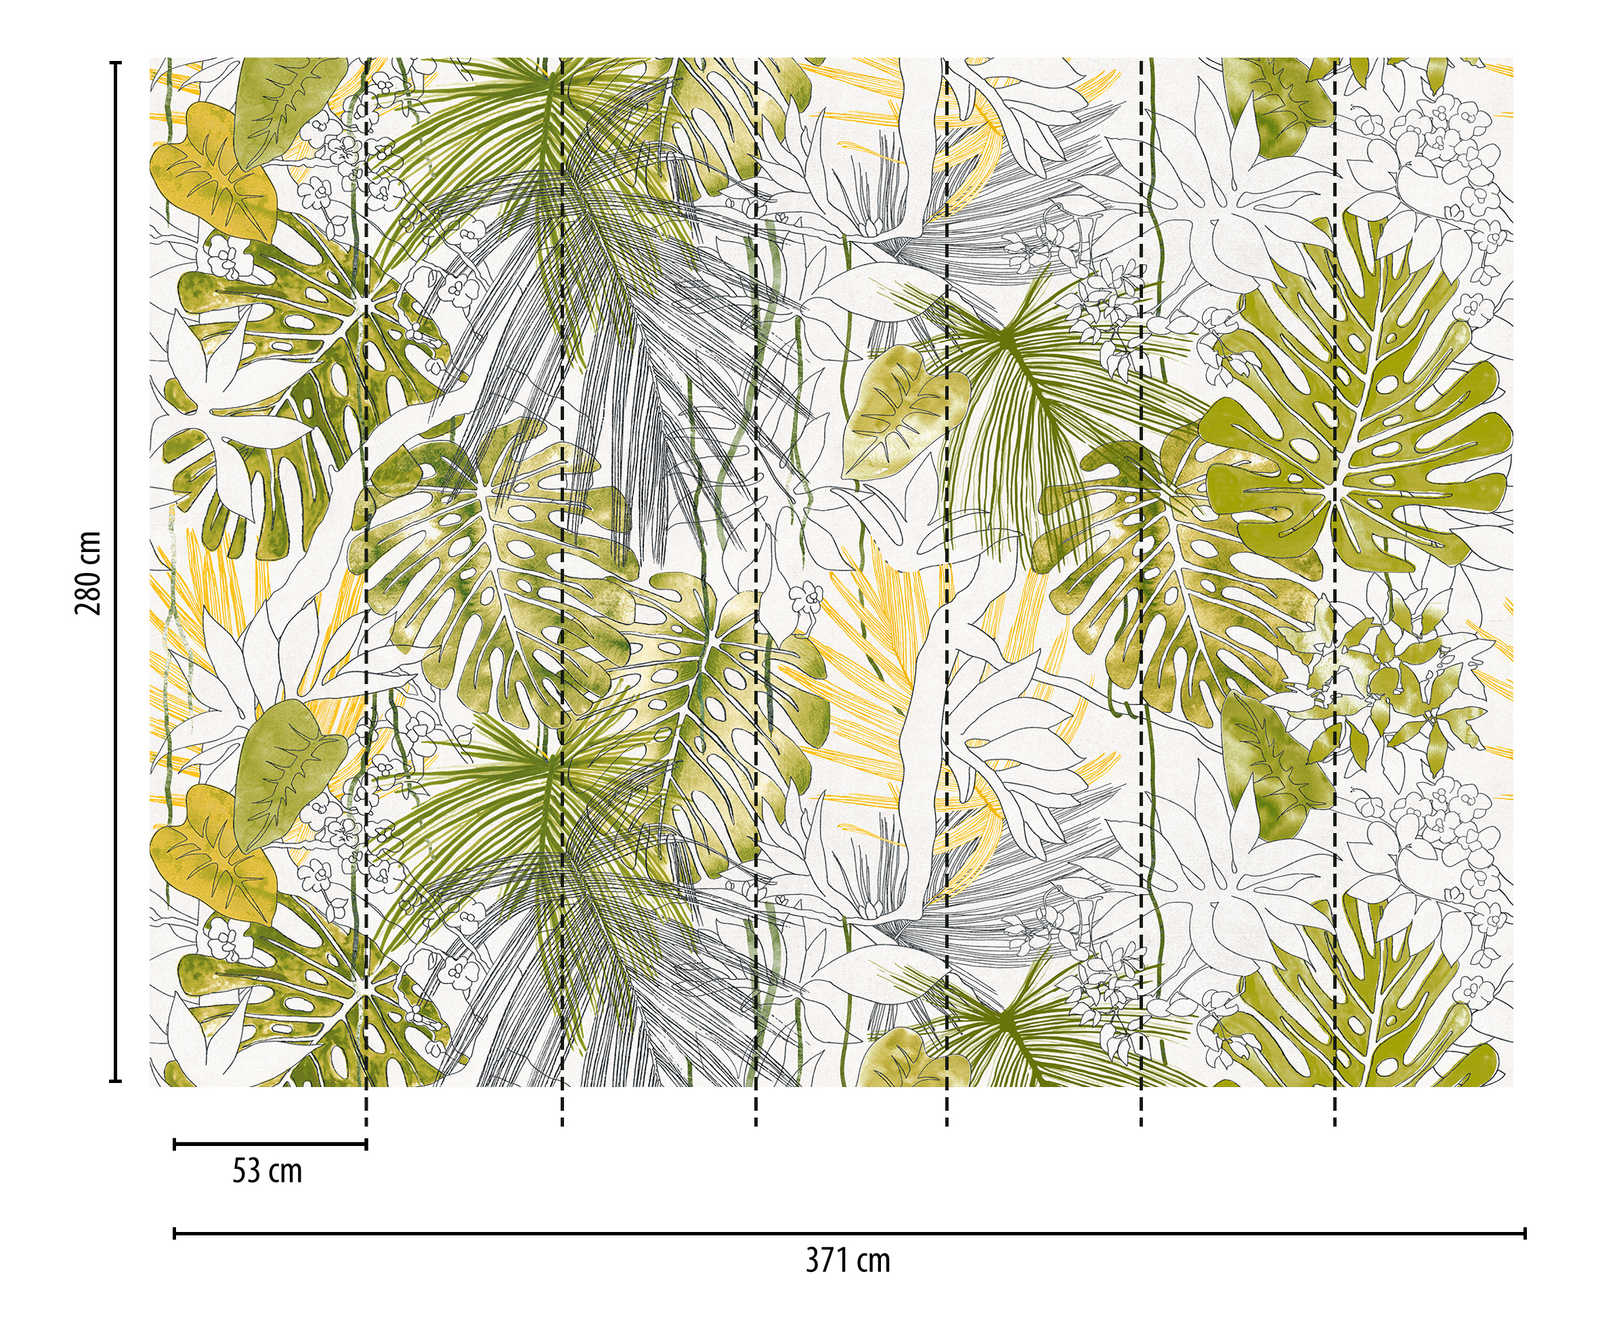             Wallpaper novelty - motif wallpaper leaves design in drawing style
        